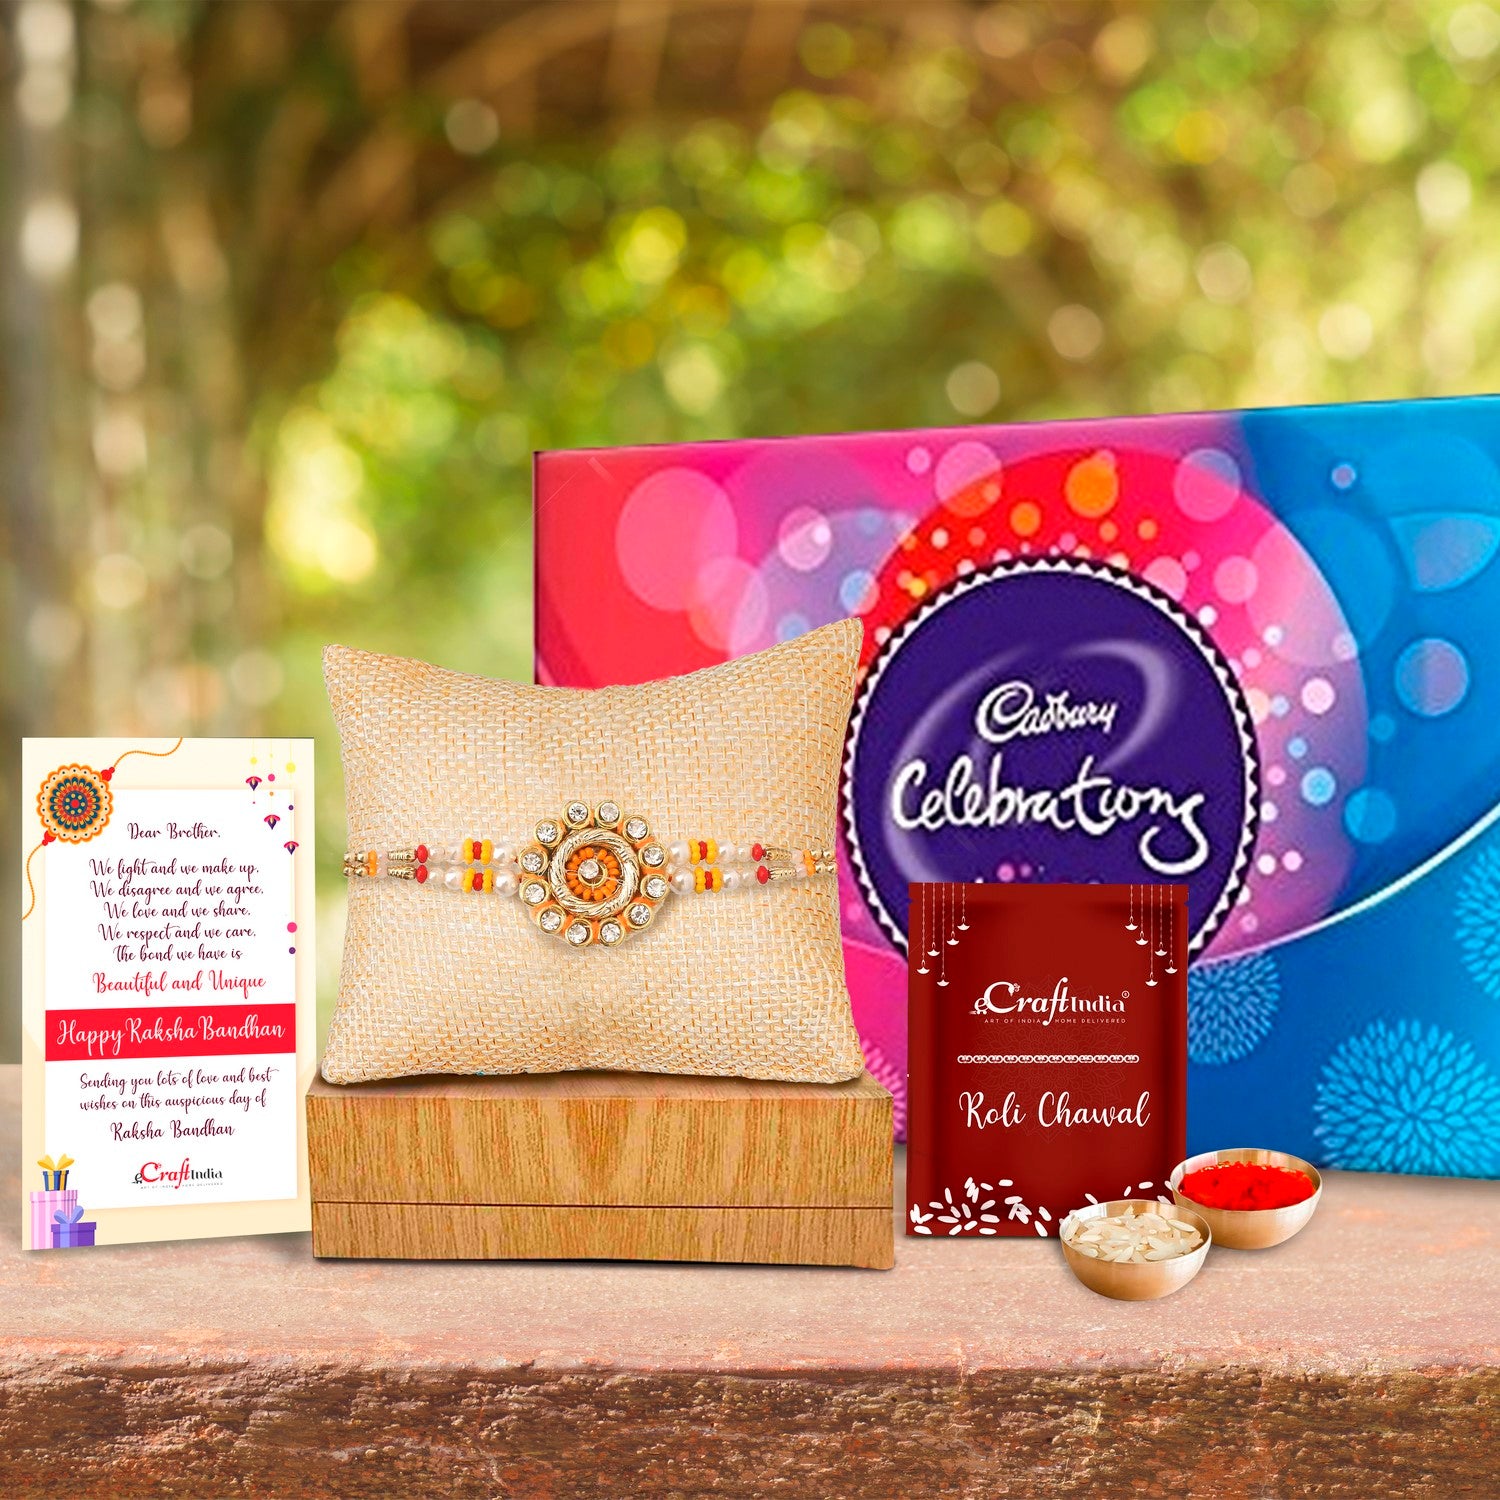 Designer Rakhi with Cadbury Celebrations Gift Pack of 7 Assorted Chocolates and Roli Chawal Pack, Best Wishes Greeting Card